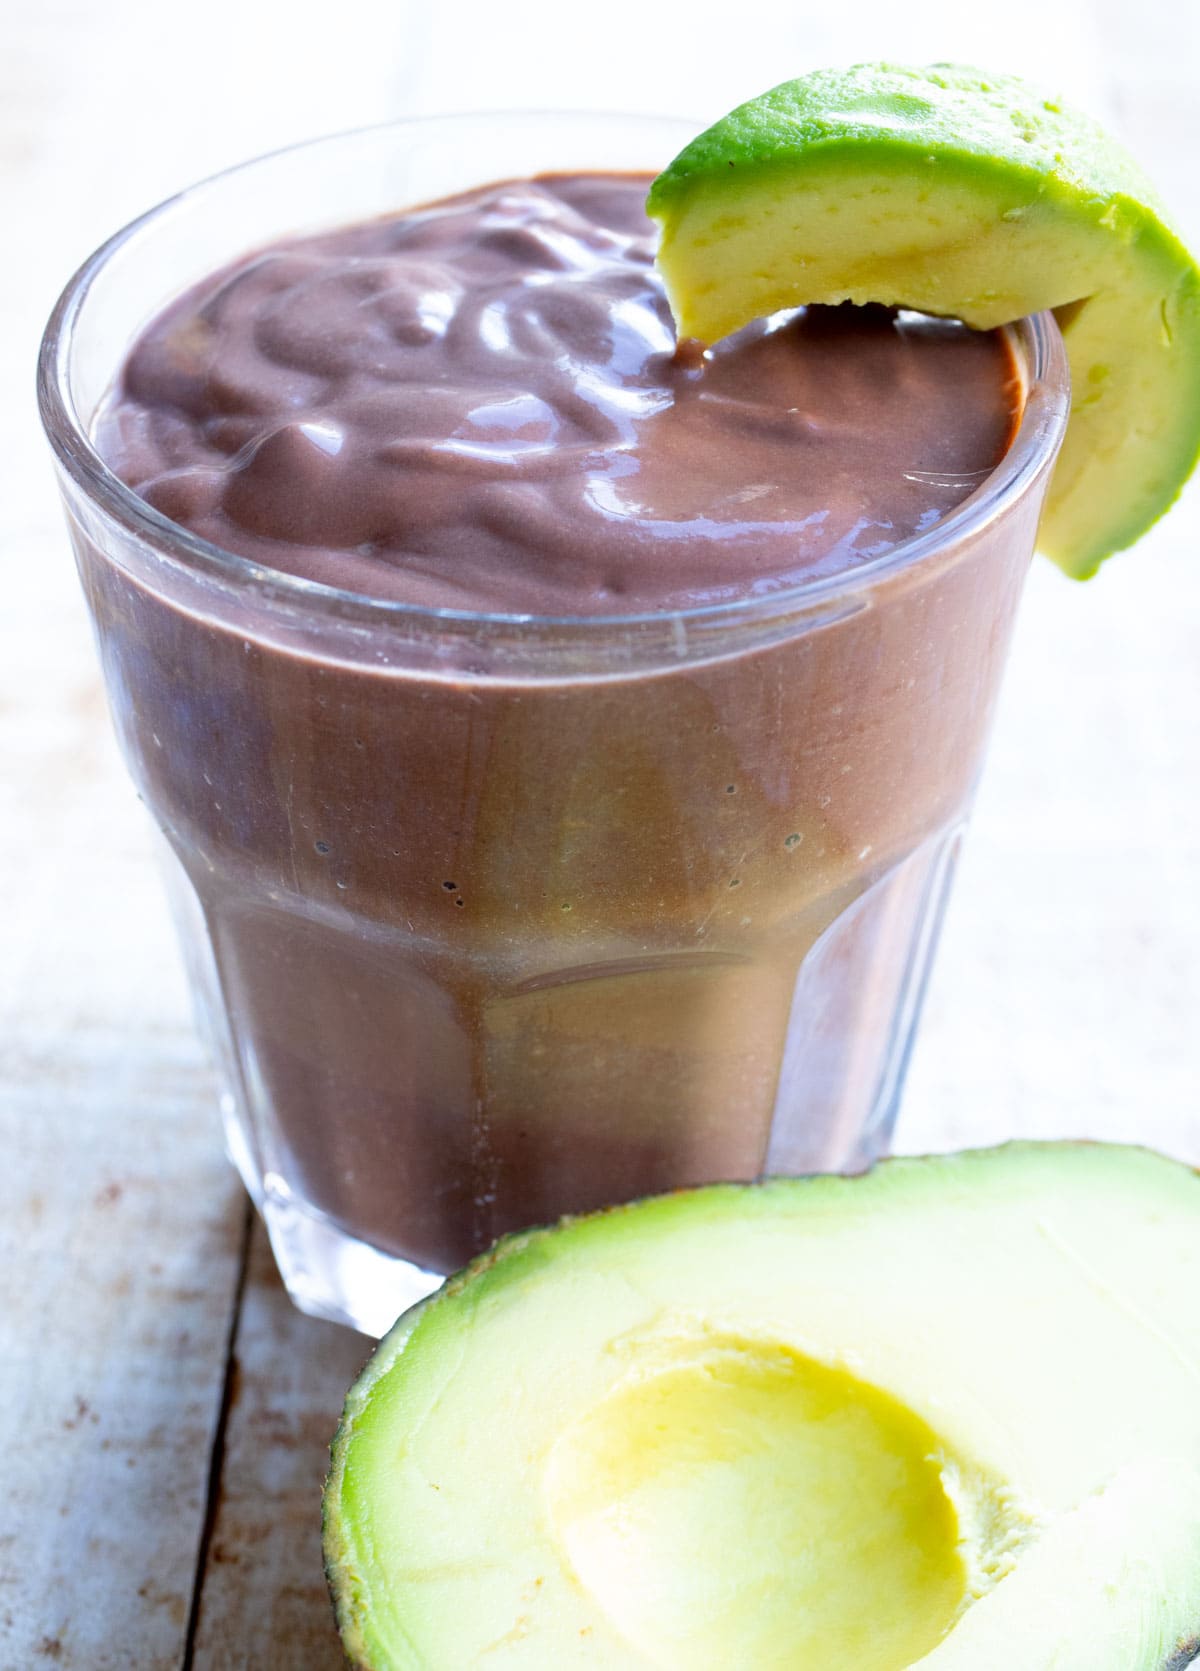 Chocolate avocado smoothie in a glass with a slice of avocado on the rim.